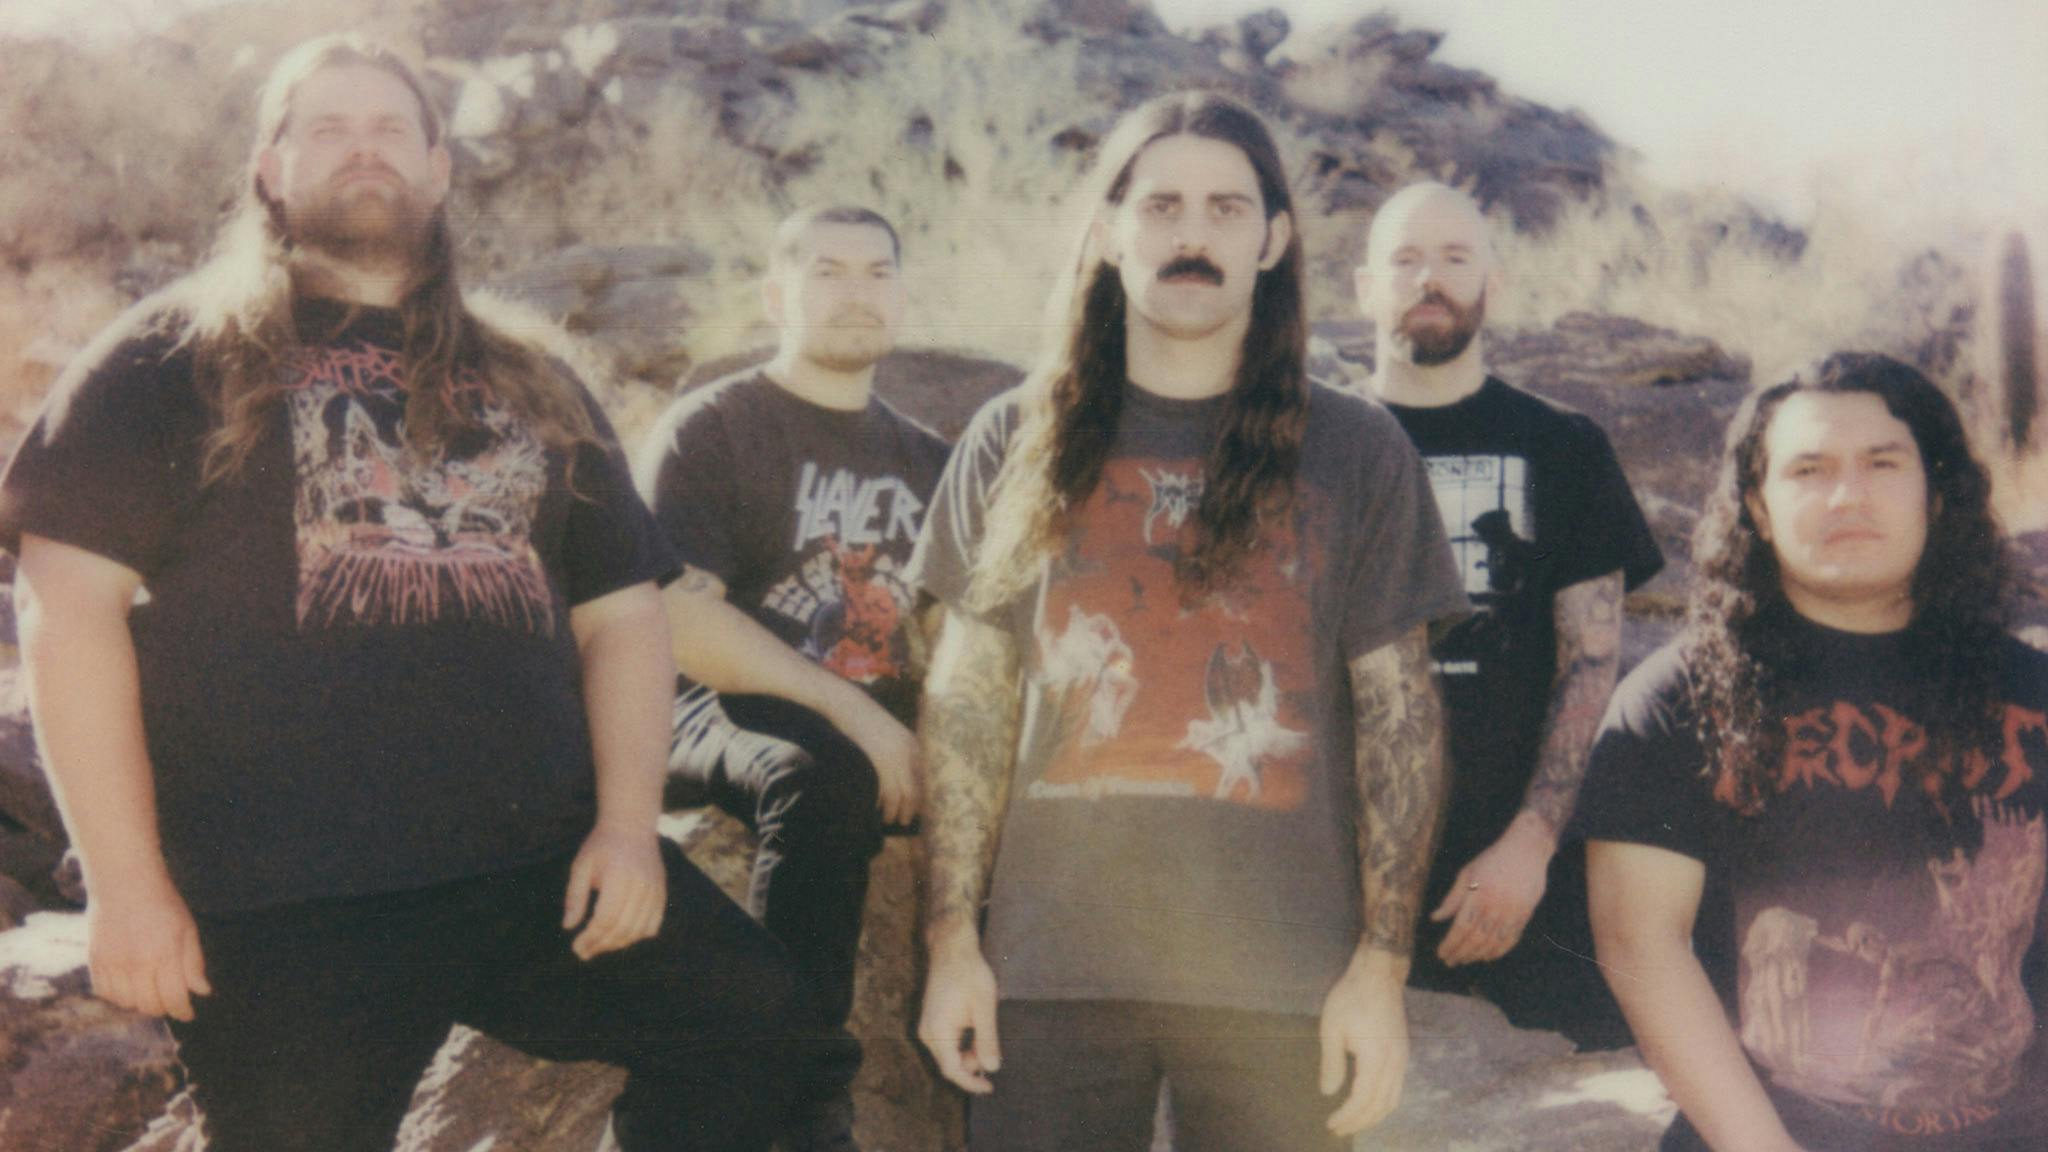 Gatecreeper: “If we’re an entry point for someone who’s never heard death metal then that’s awesome!”